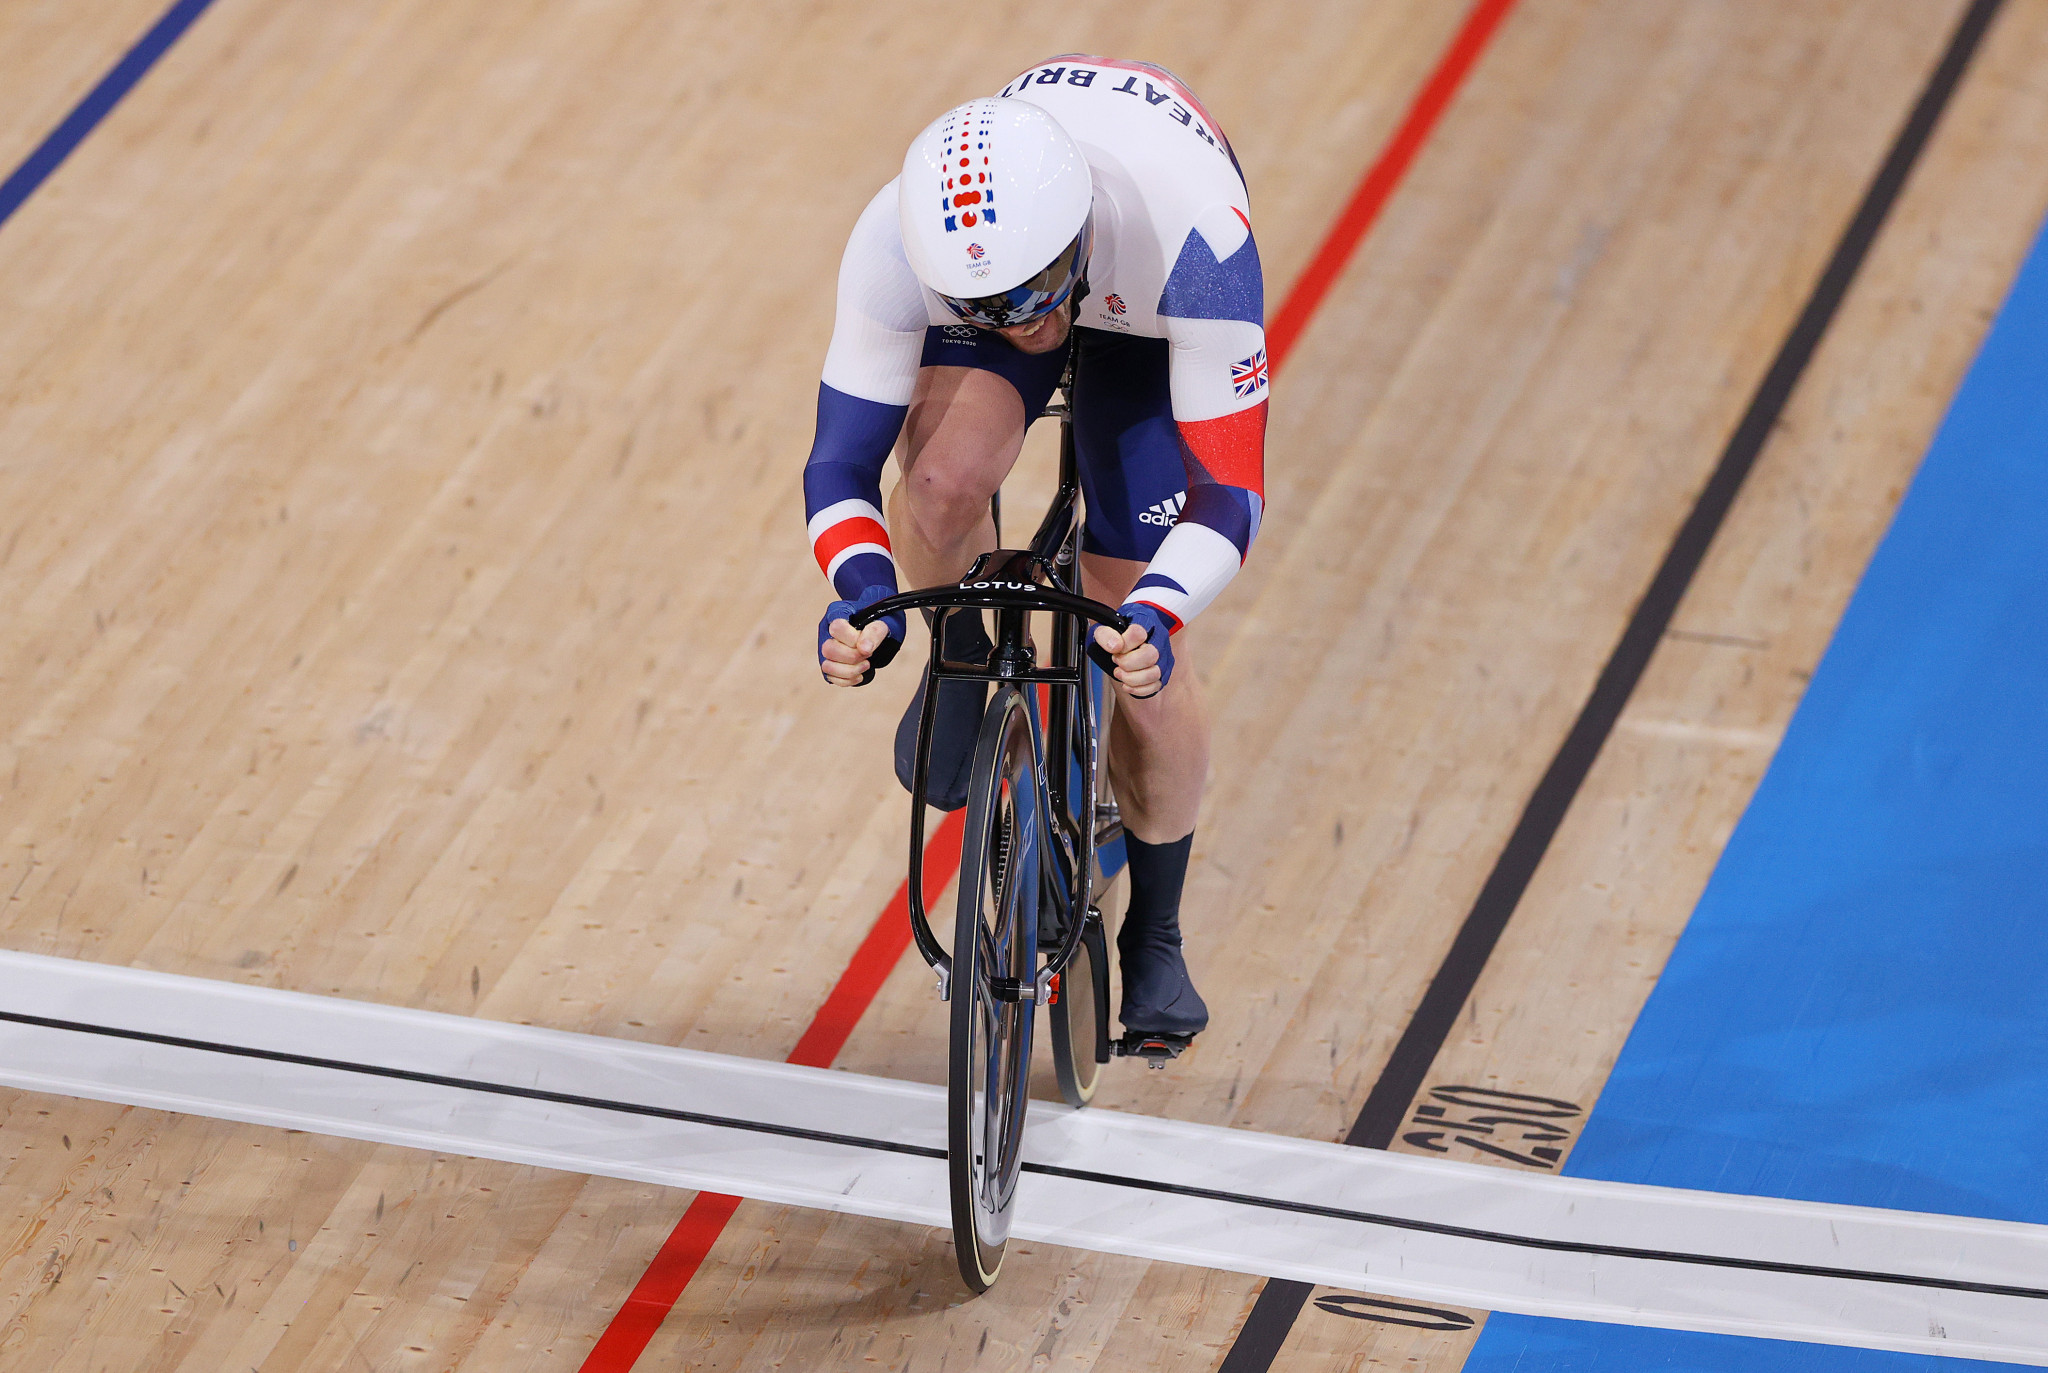 Britain's Jason Kenny retained the men's keirin title with a powerful front riding performance ©Getty Images